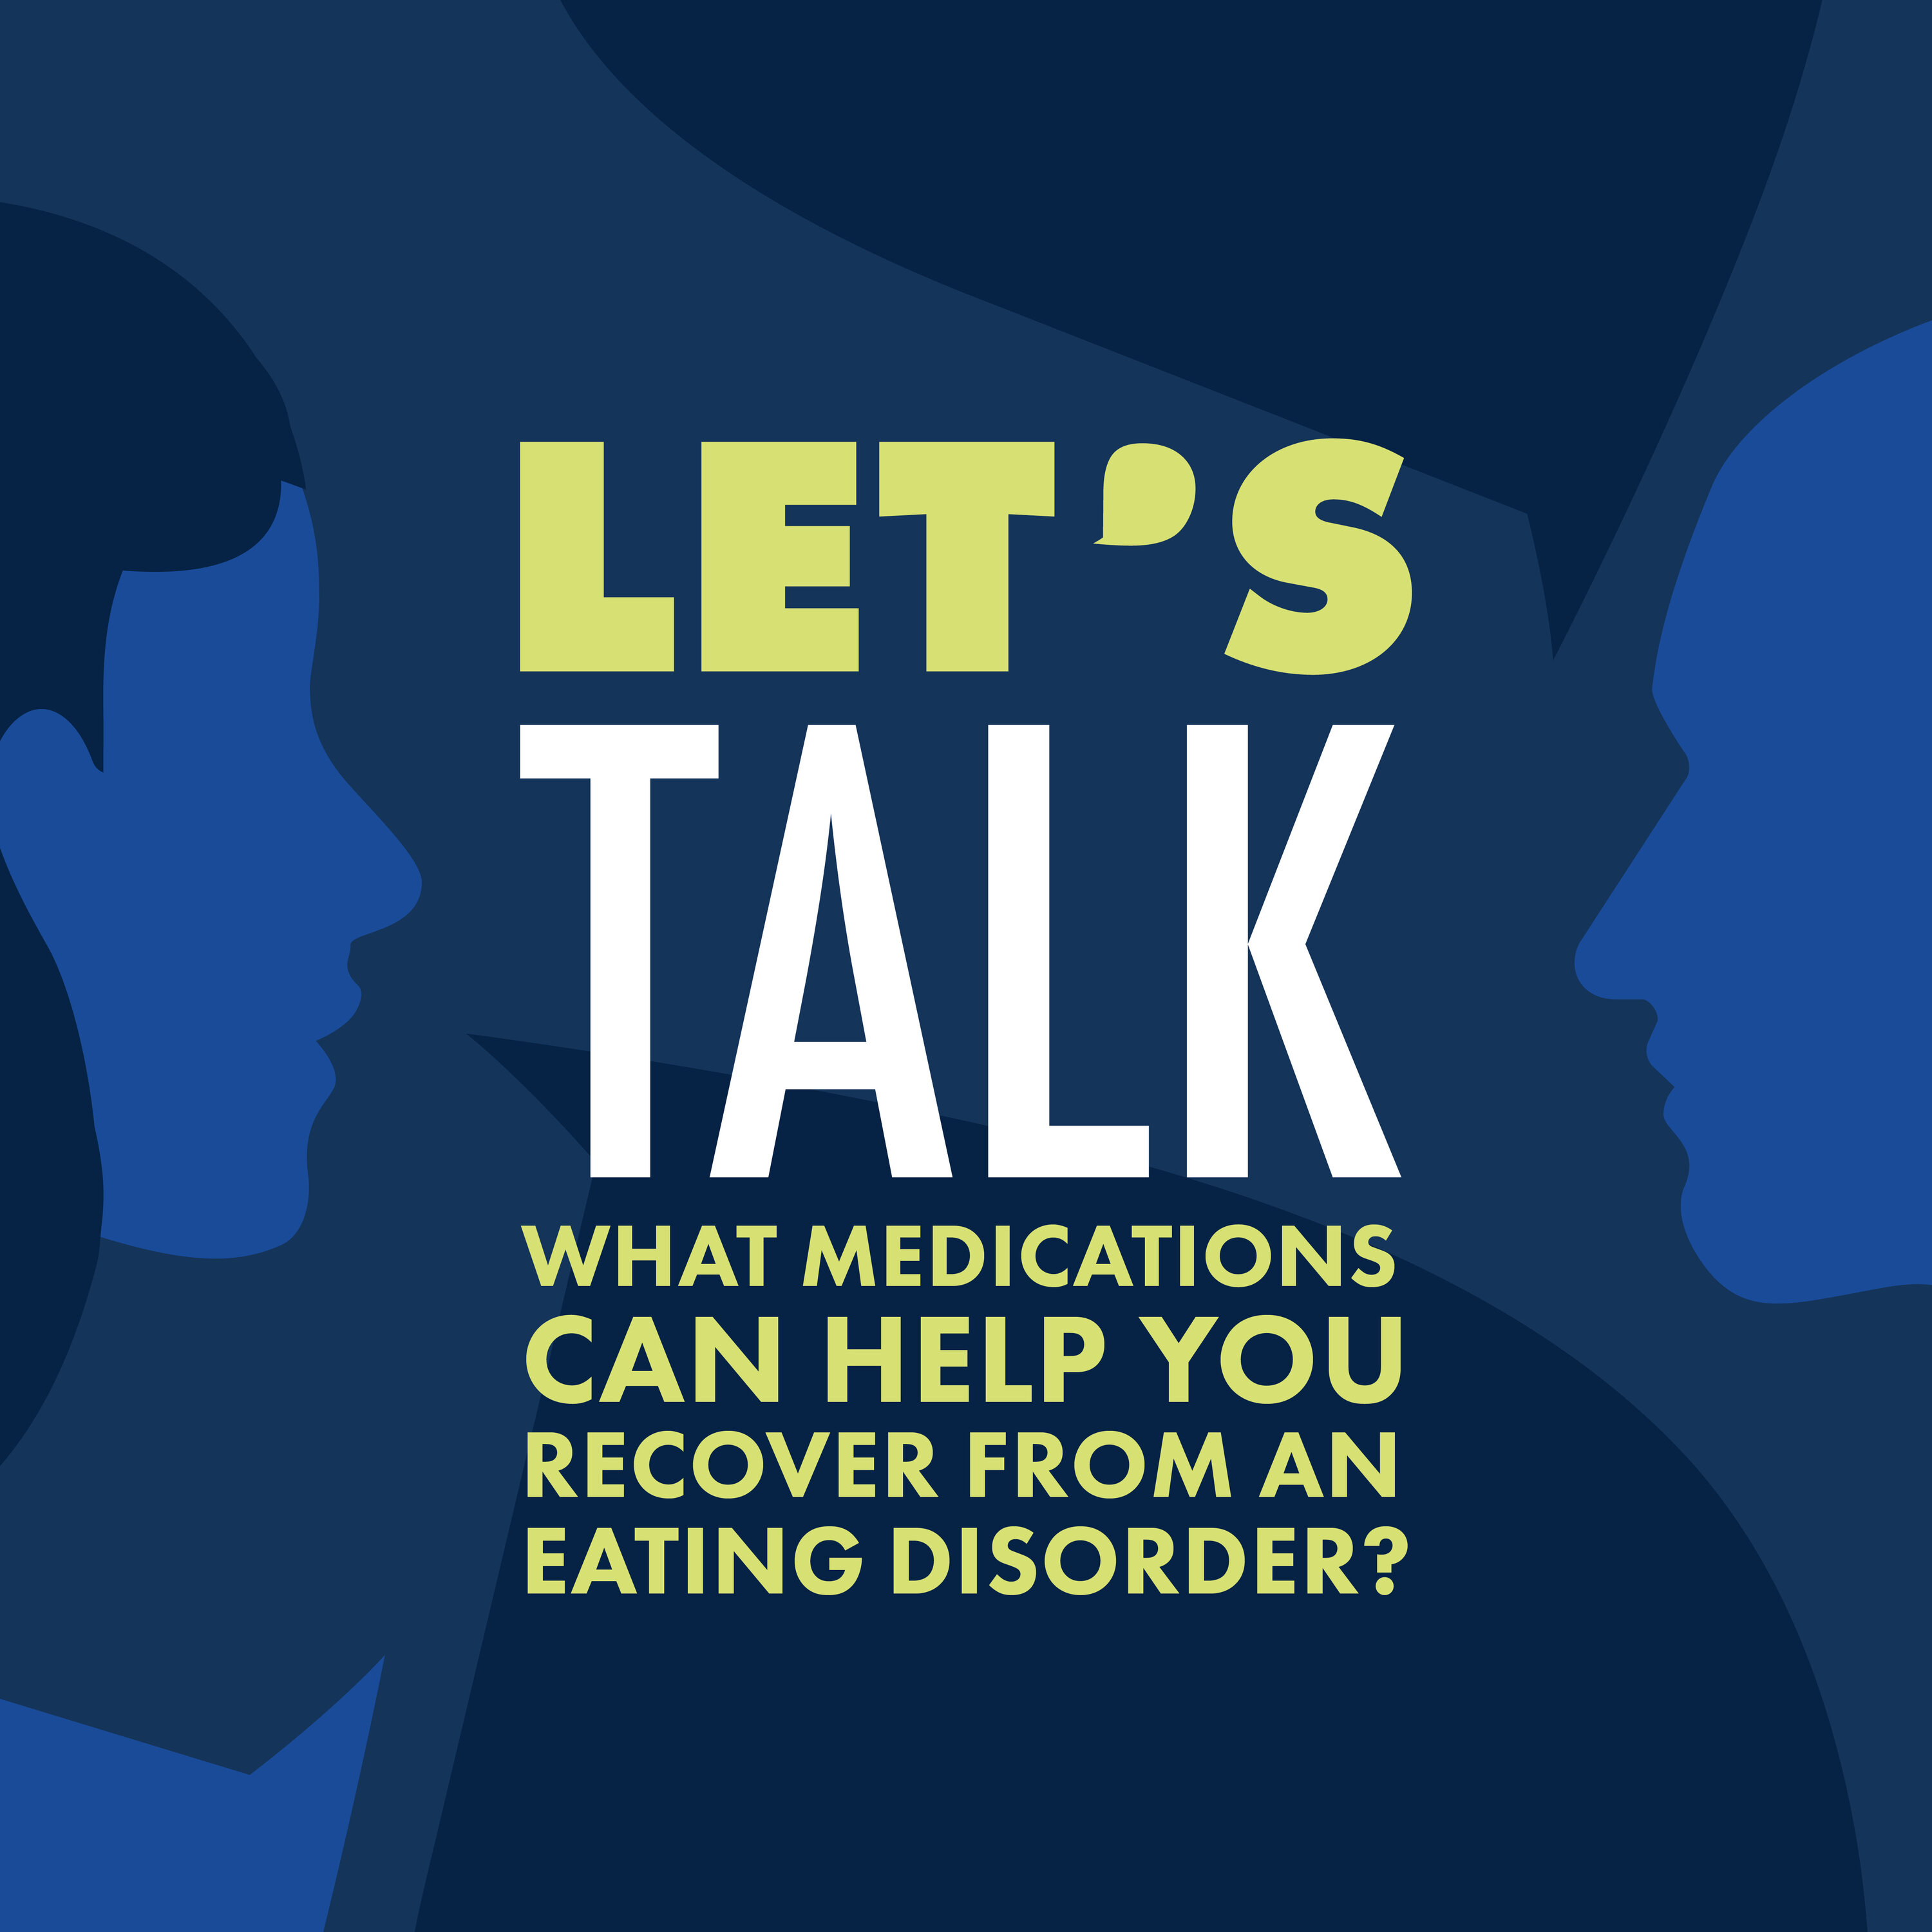 What medications can help you recover from an eating disorder?